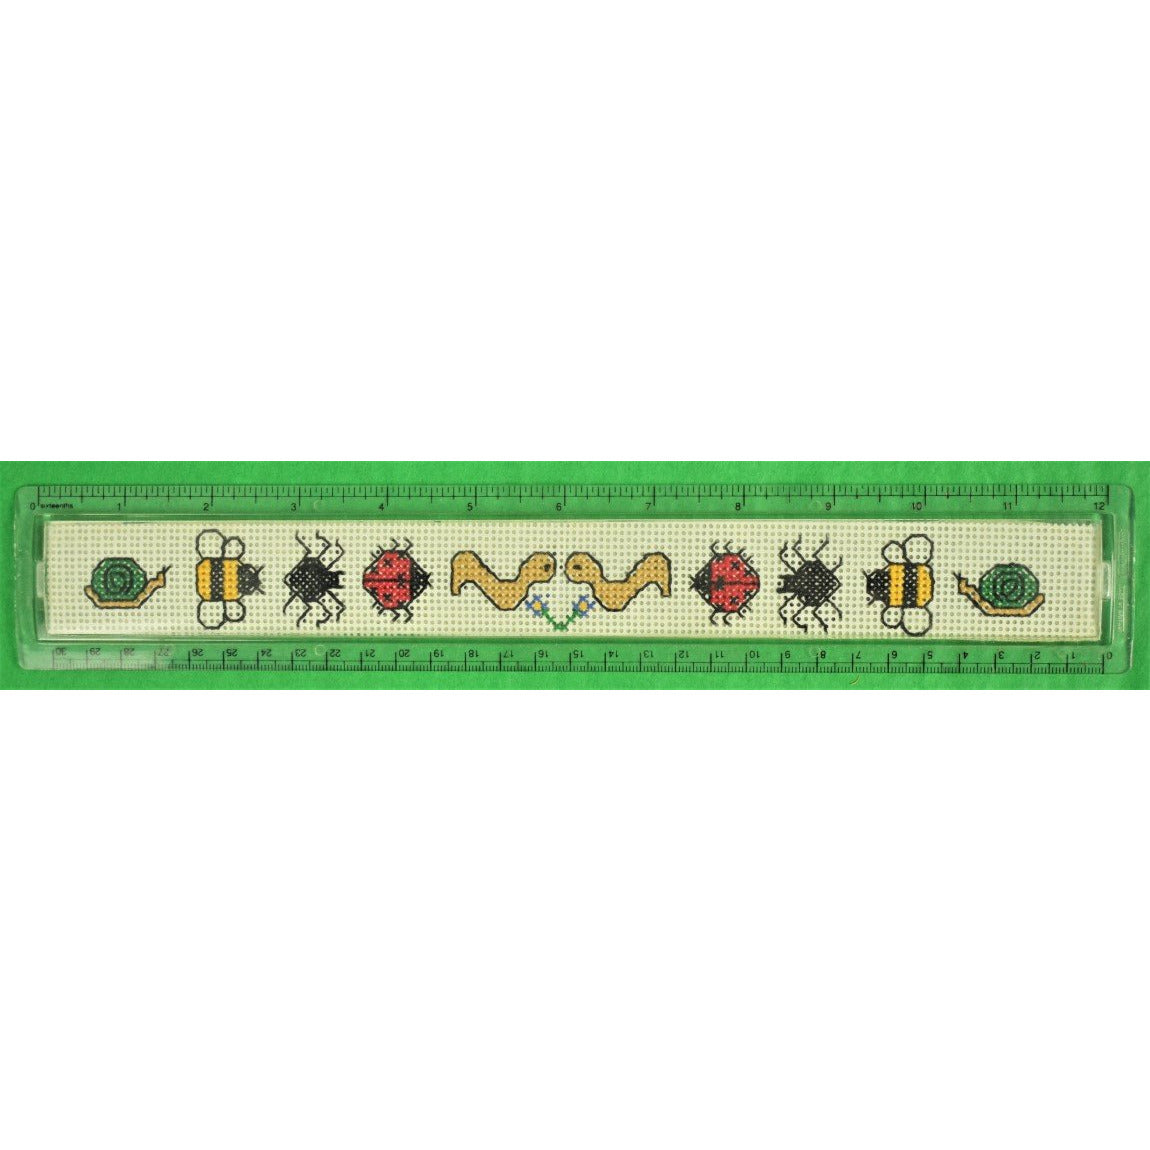 Needlepoint 10 Insect Canvas Lucite 12 inch Ruler Made in Britain